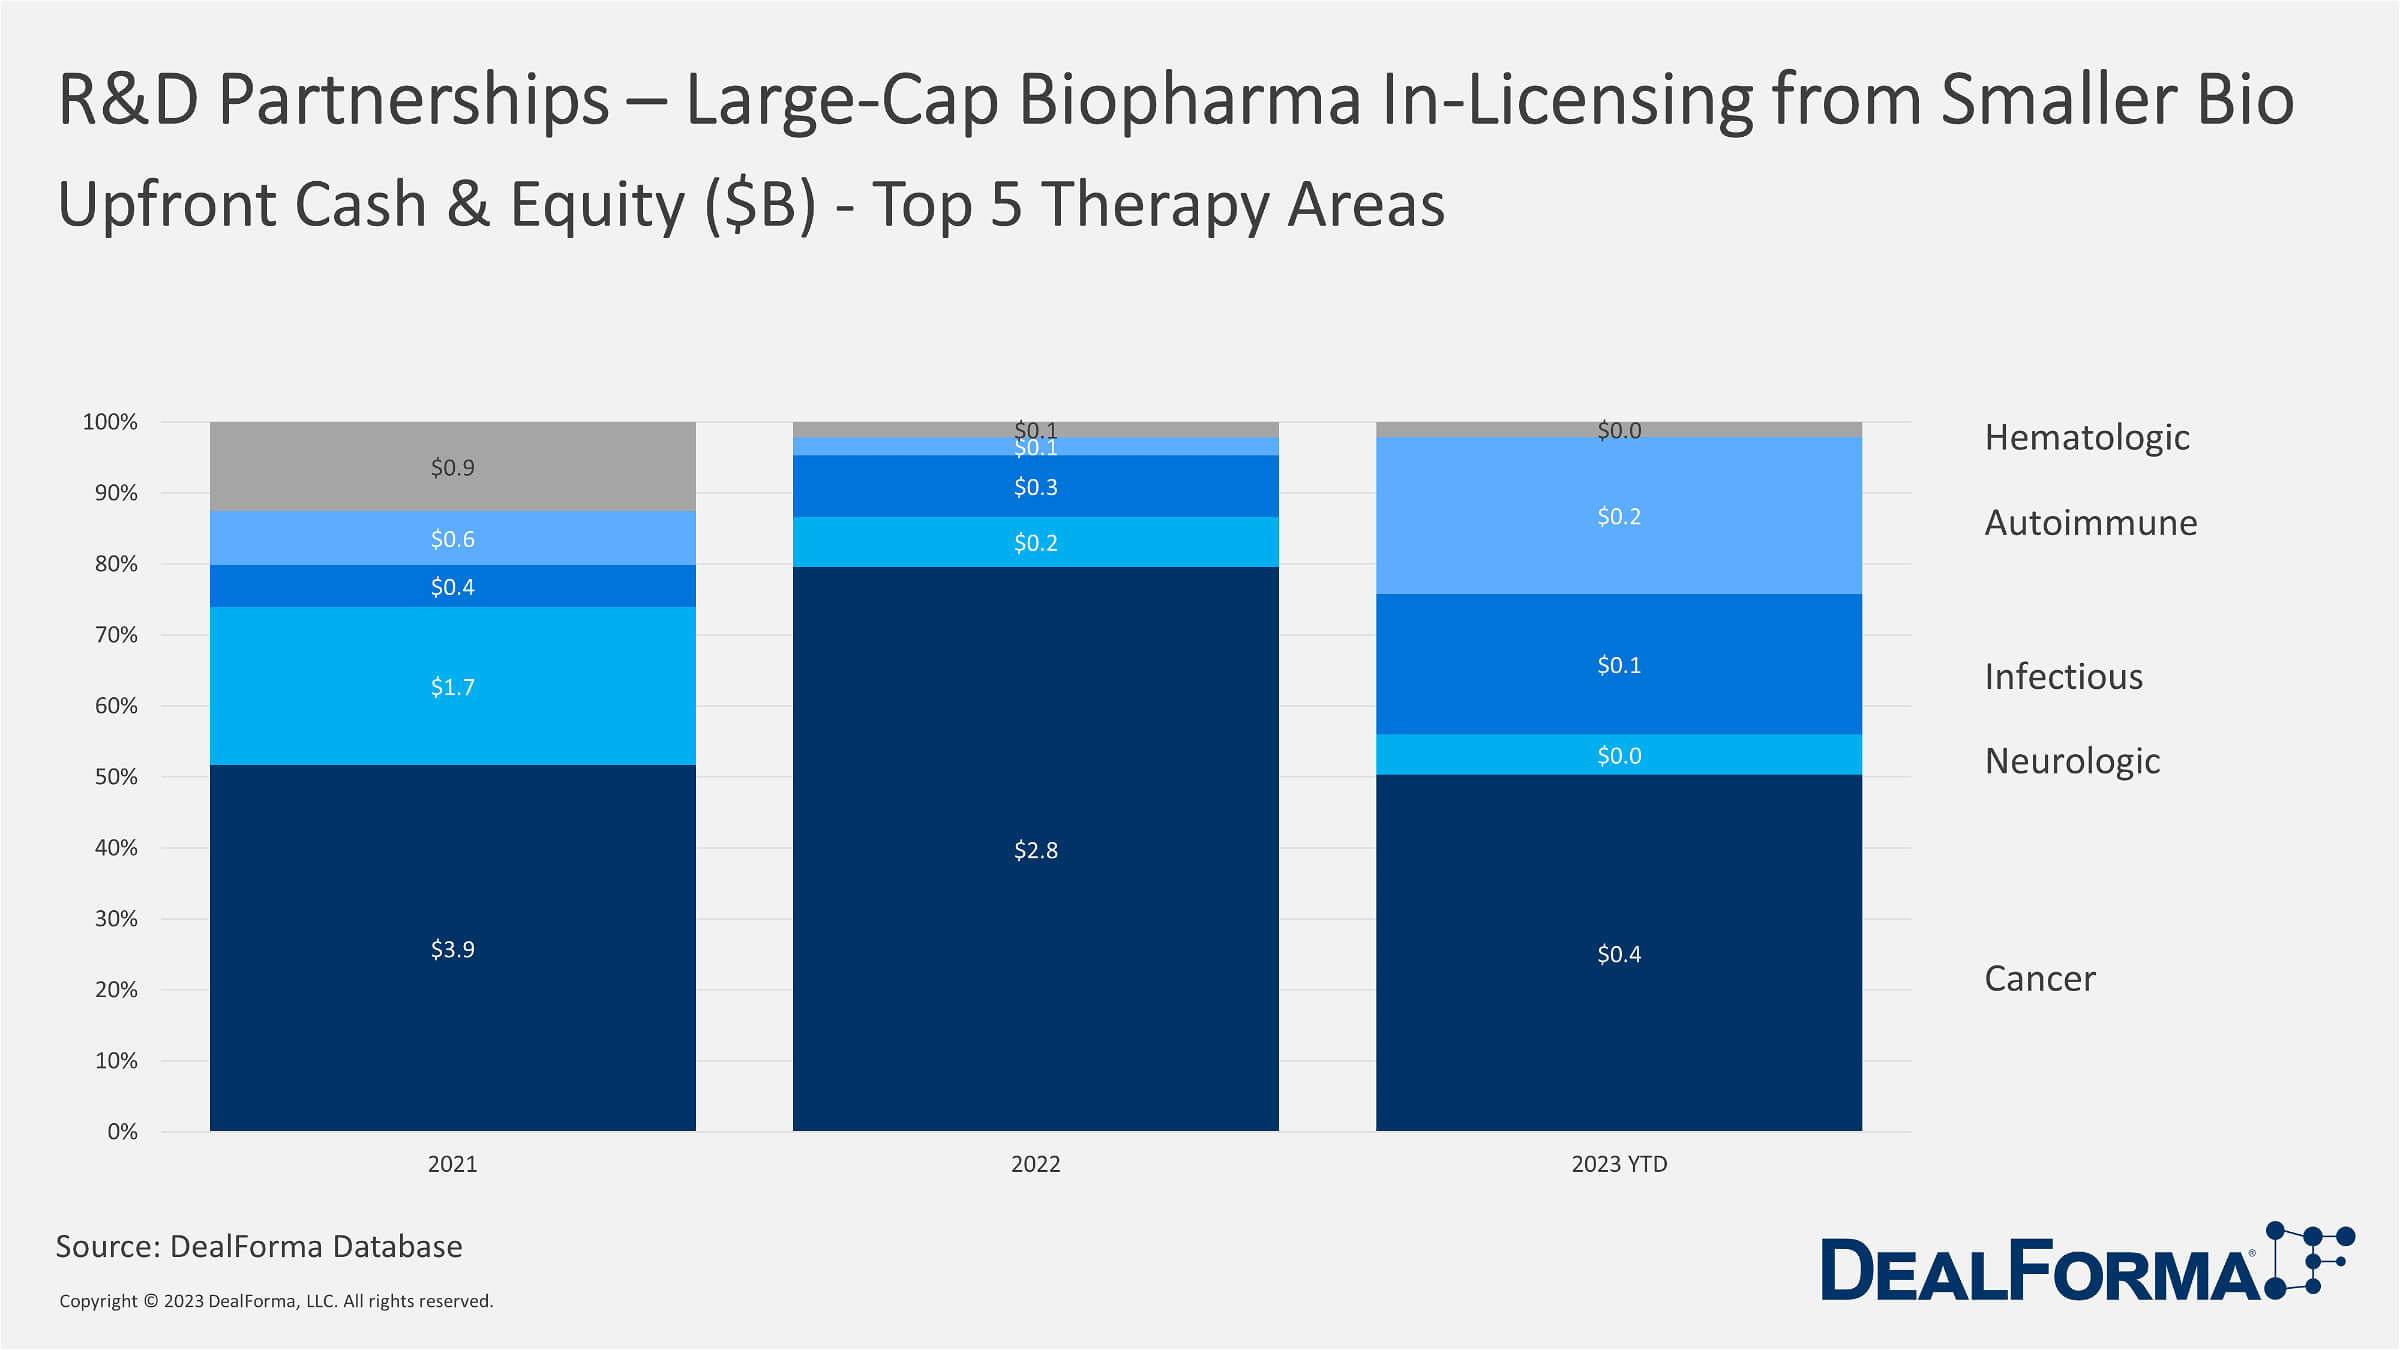 Share Of Large Cap Biopharma Upfront Cash Equity Paid for In Licensing in The Top 5 Therapy Areas